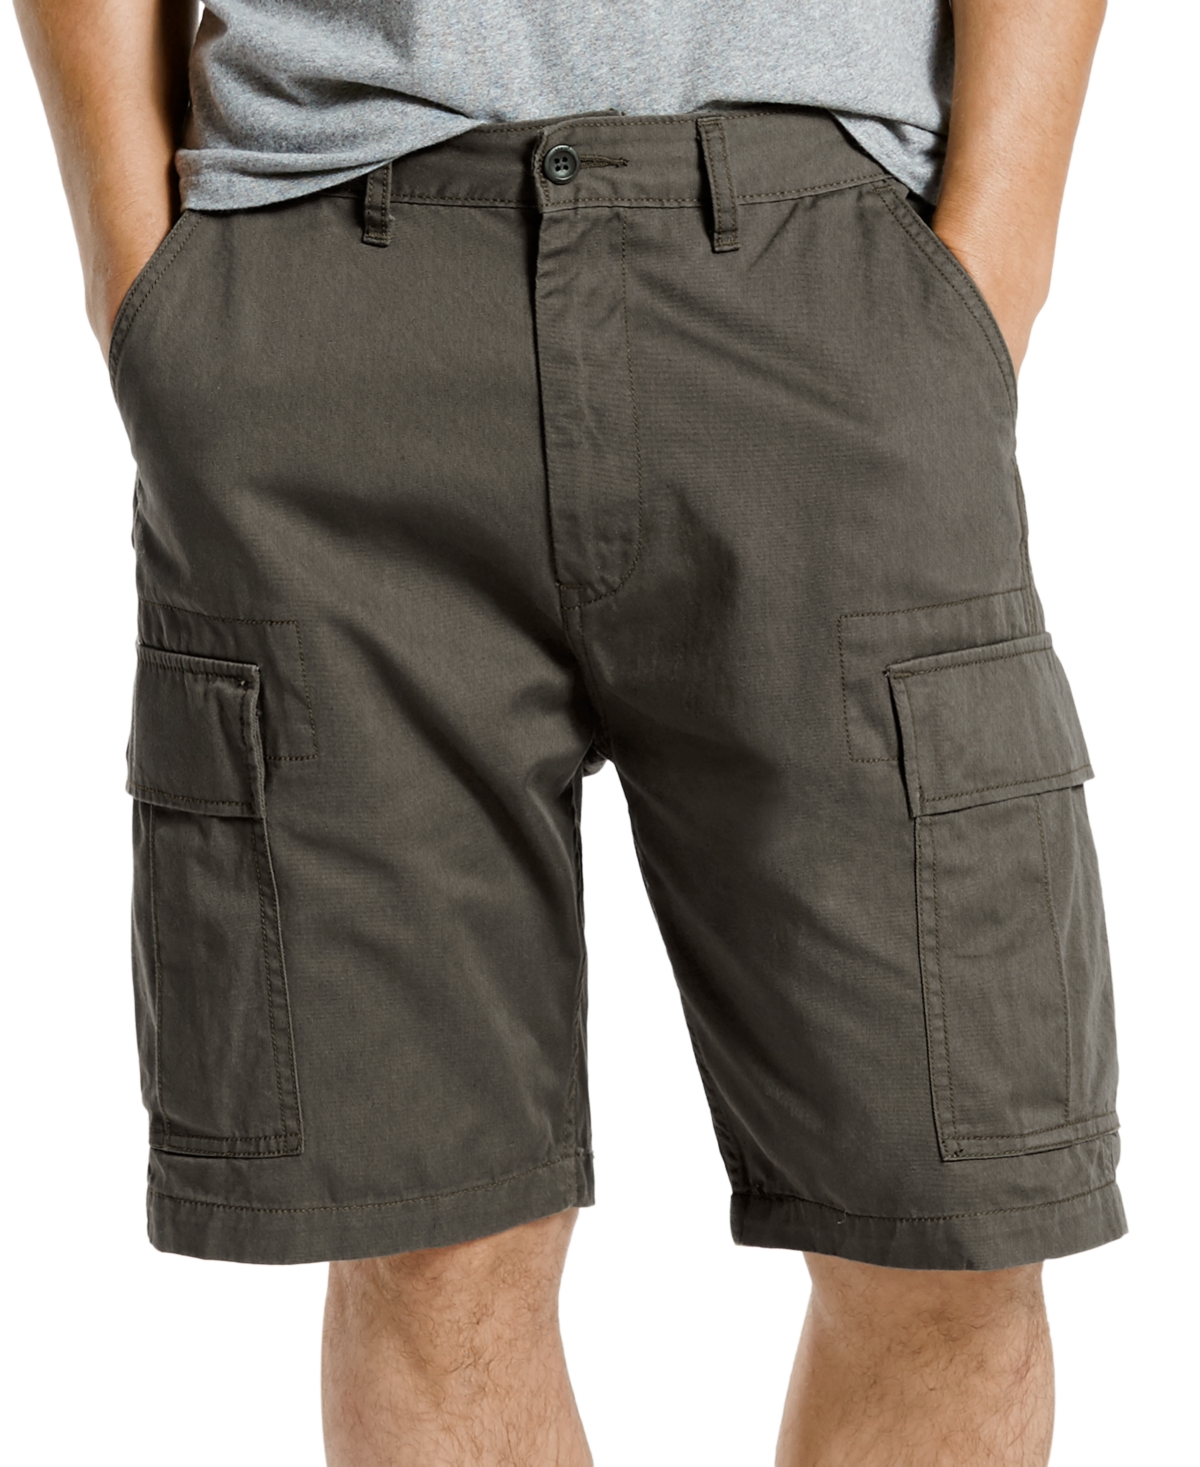 UPC 193239486810 product image for Levi's Men's Big and Tall Loose Fit Carrier Cargo Shorts | upcitemdb.com